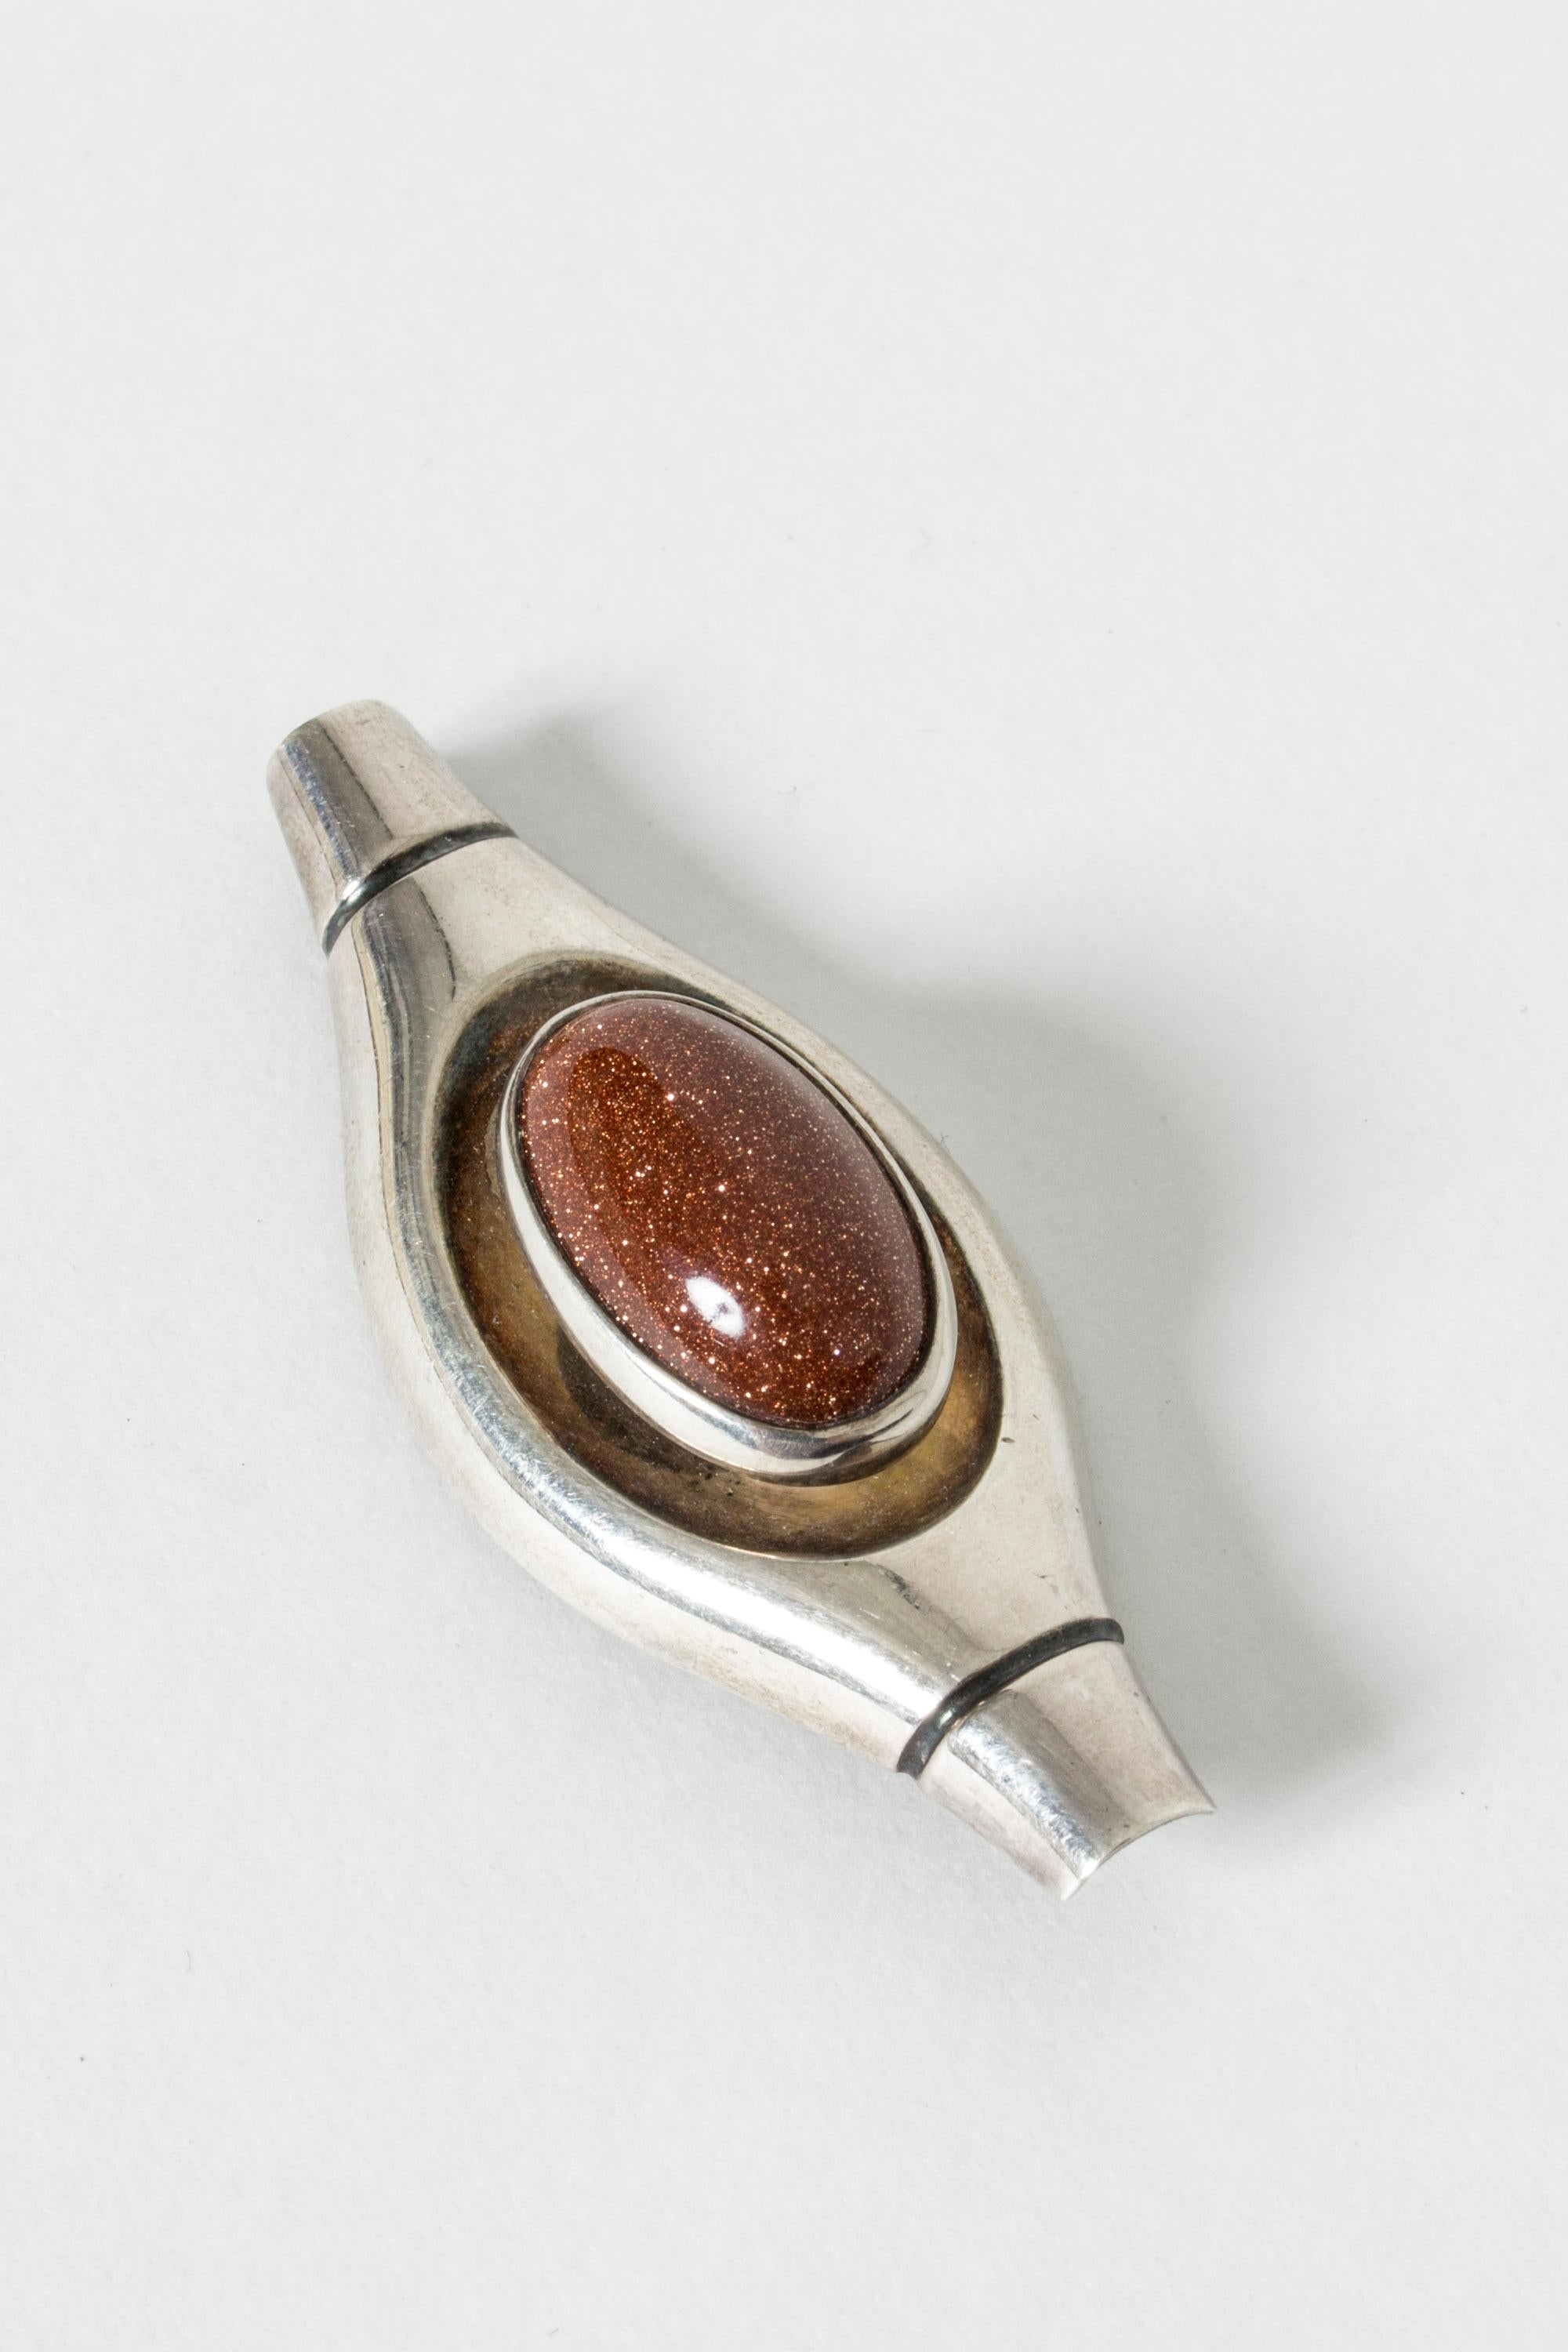 Silver and goldstone brooch in a cool, streamline design by Elis Kauppi for his own firm Kupittaan Kulta Oy, one of Finland’s foremost modernist jewelers of the 1950s and 1960s.